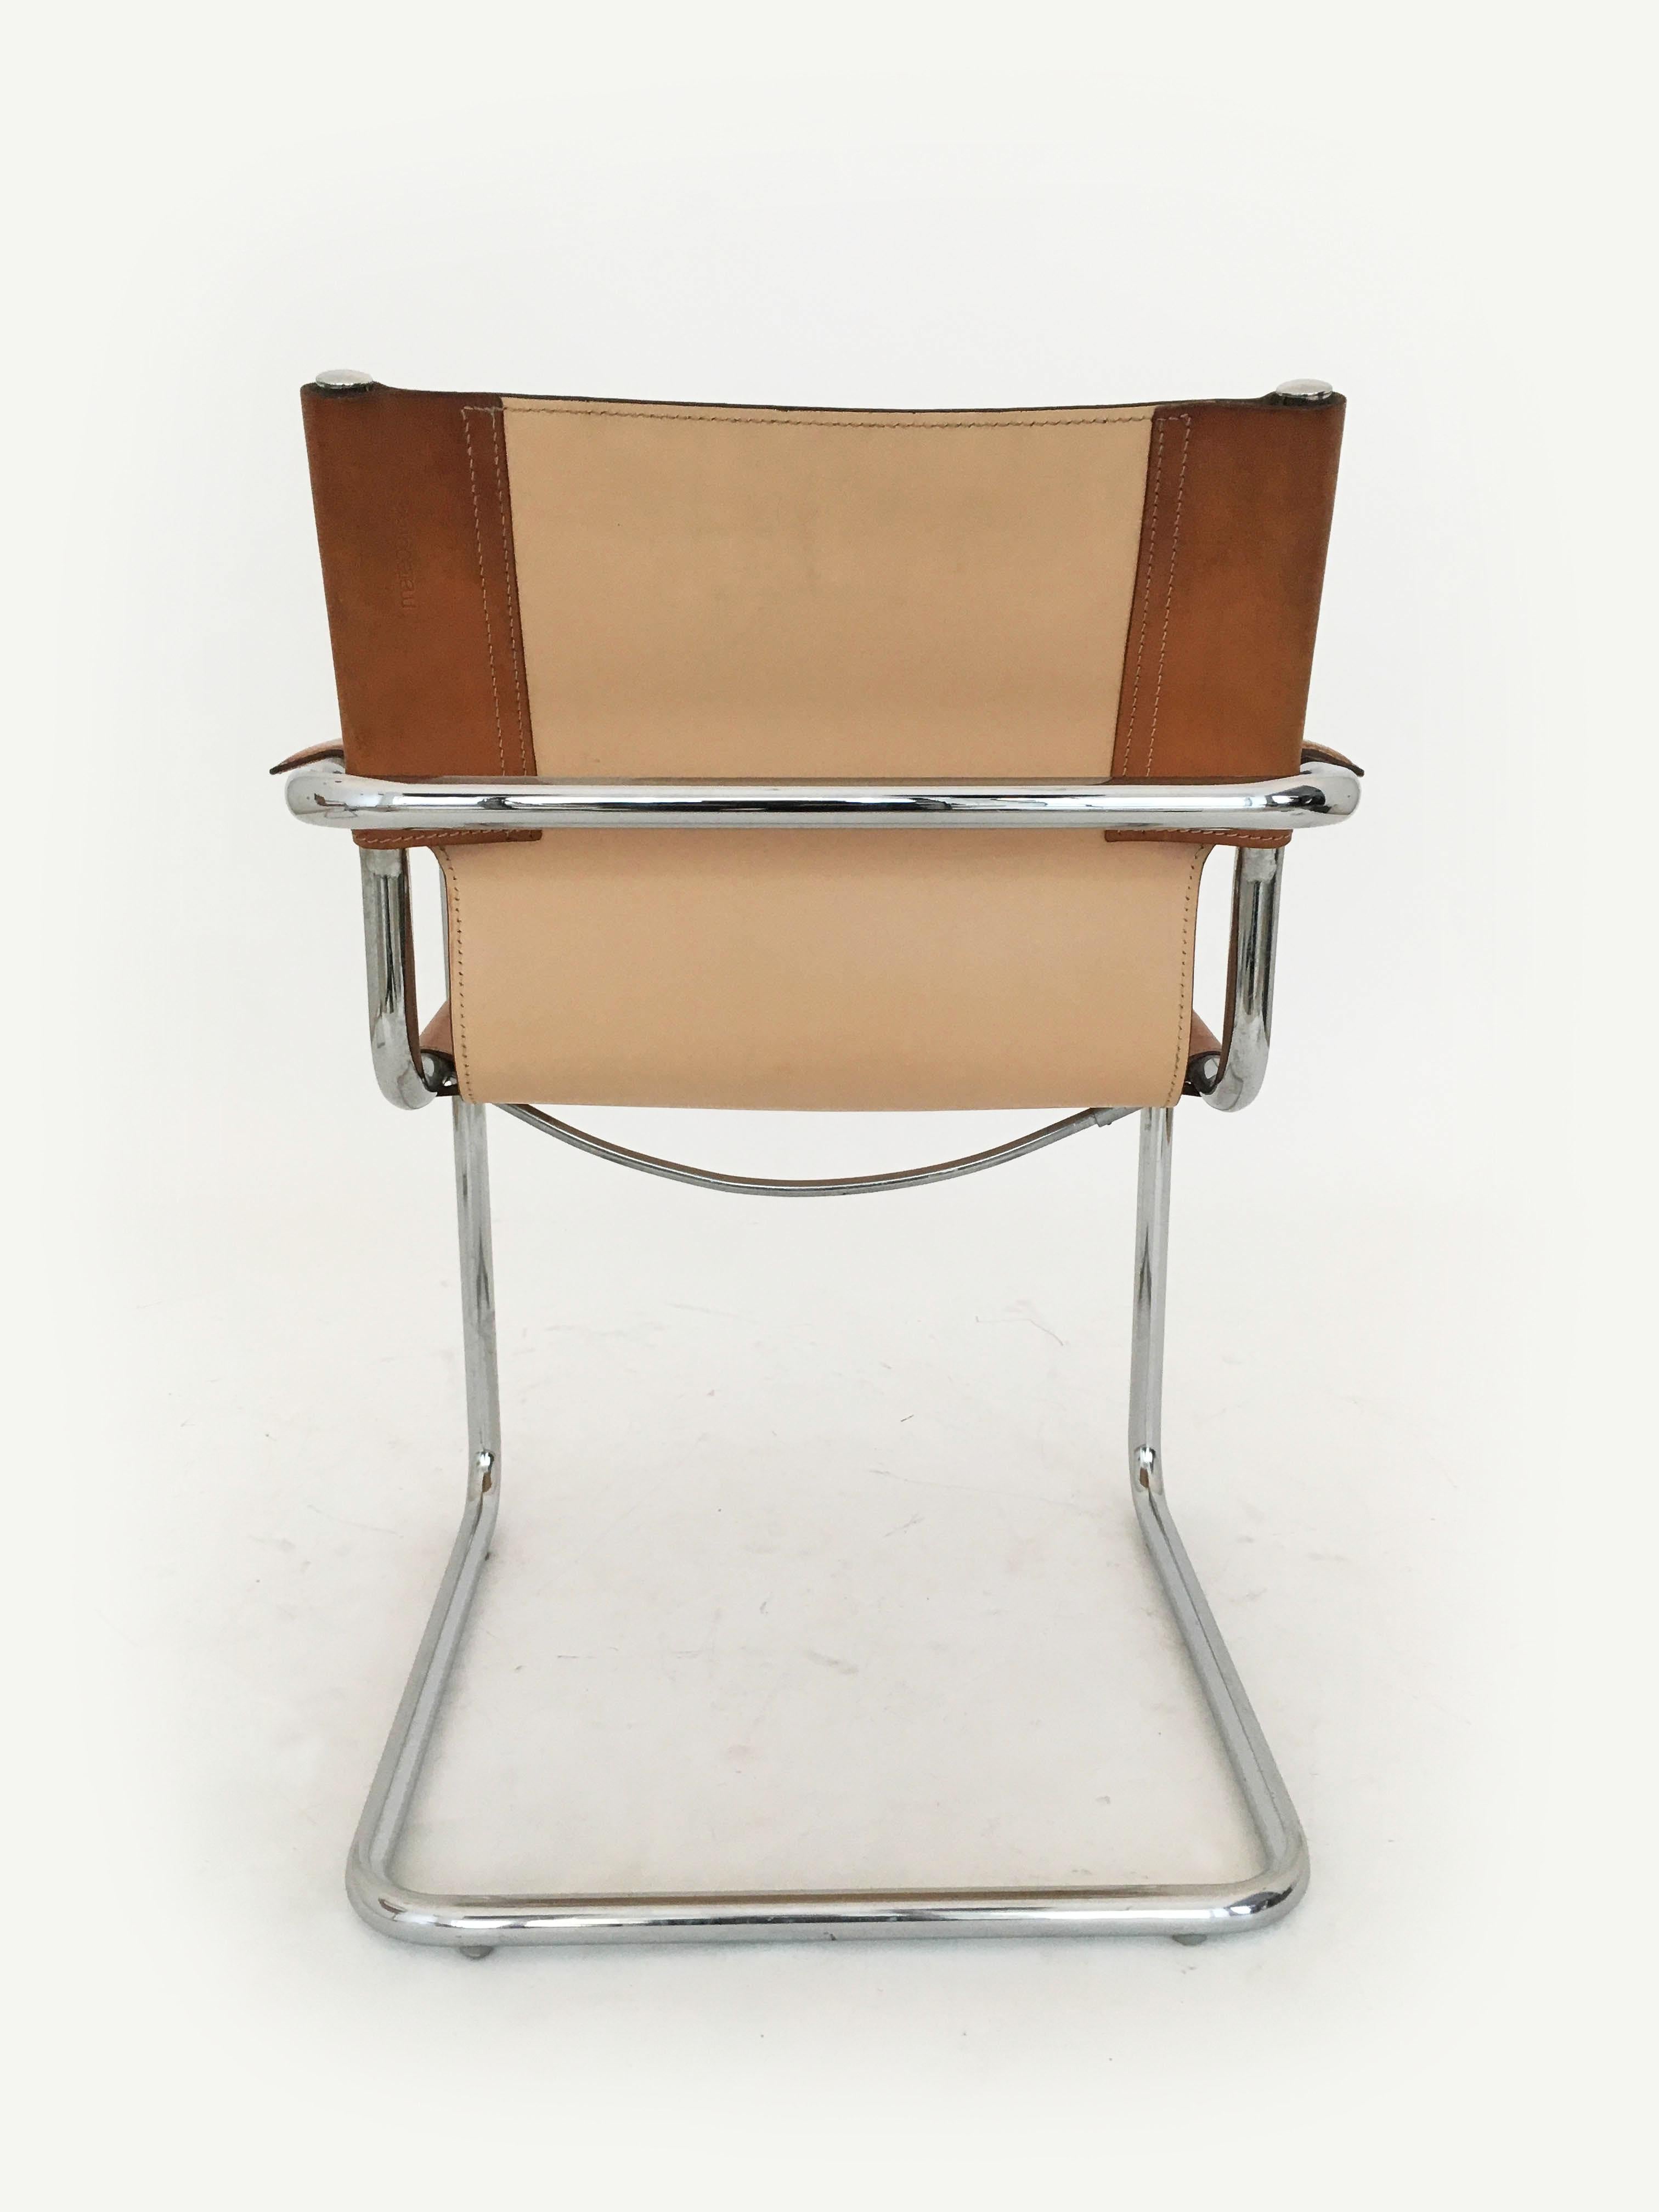 Matteo Grassi Cantilever Visitor Side Chairs Pair, Italy, 1970s (Metall) im Angebot